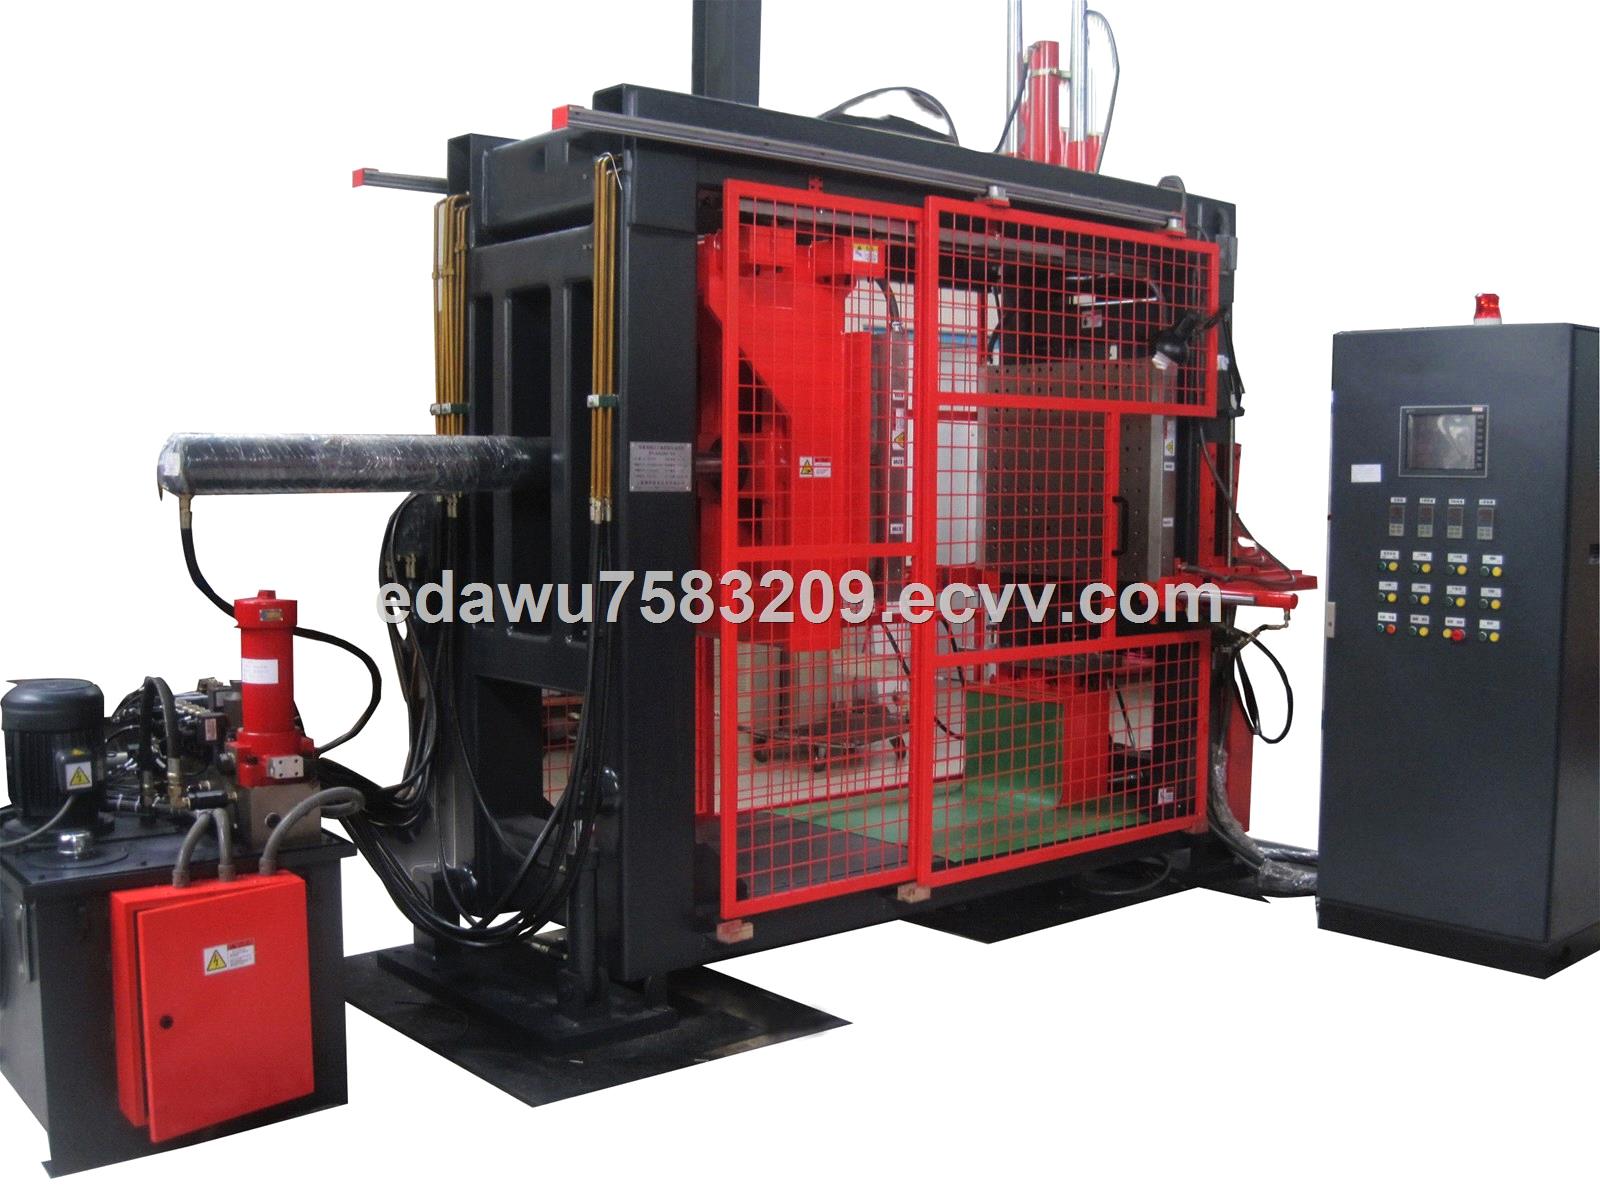 APG Epoxy Resin Clamping Machine for Low Voltage Instrument Transformer